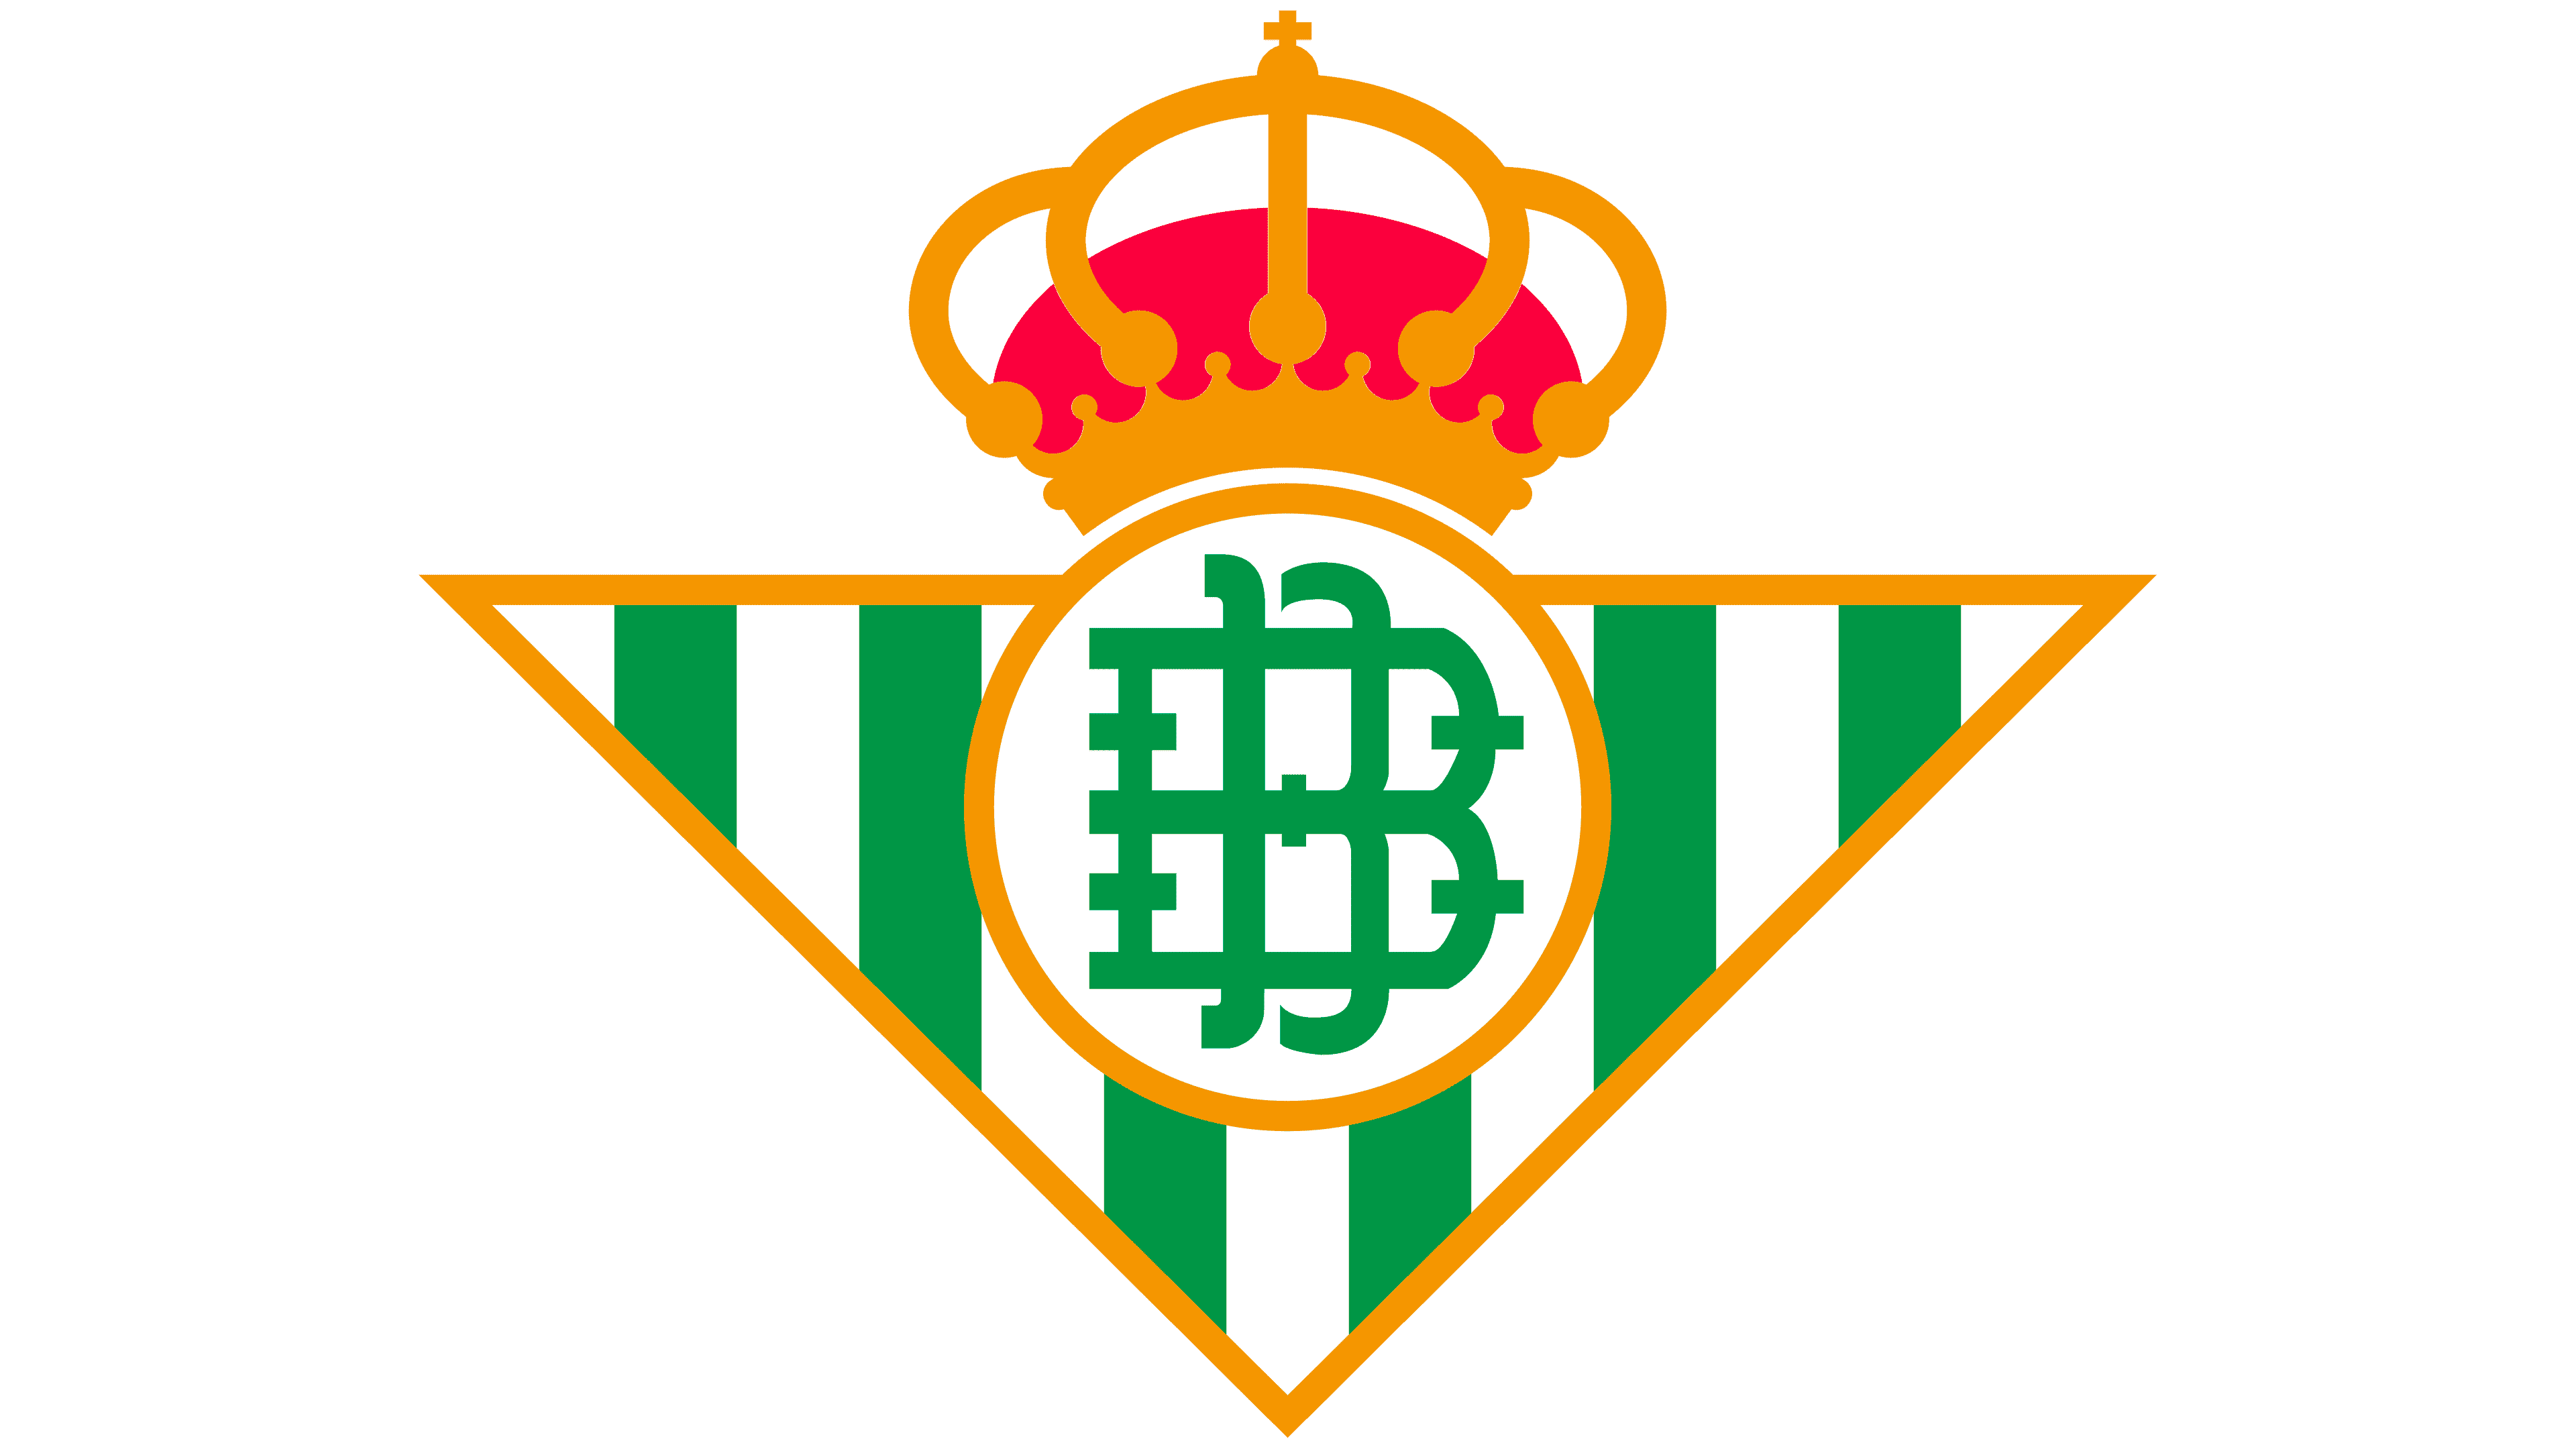 Real Betis Logo, PNG, Symbol, History, Meaning